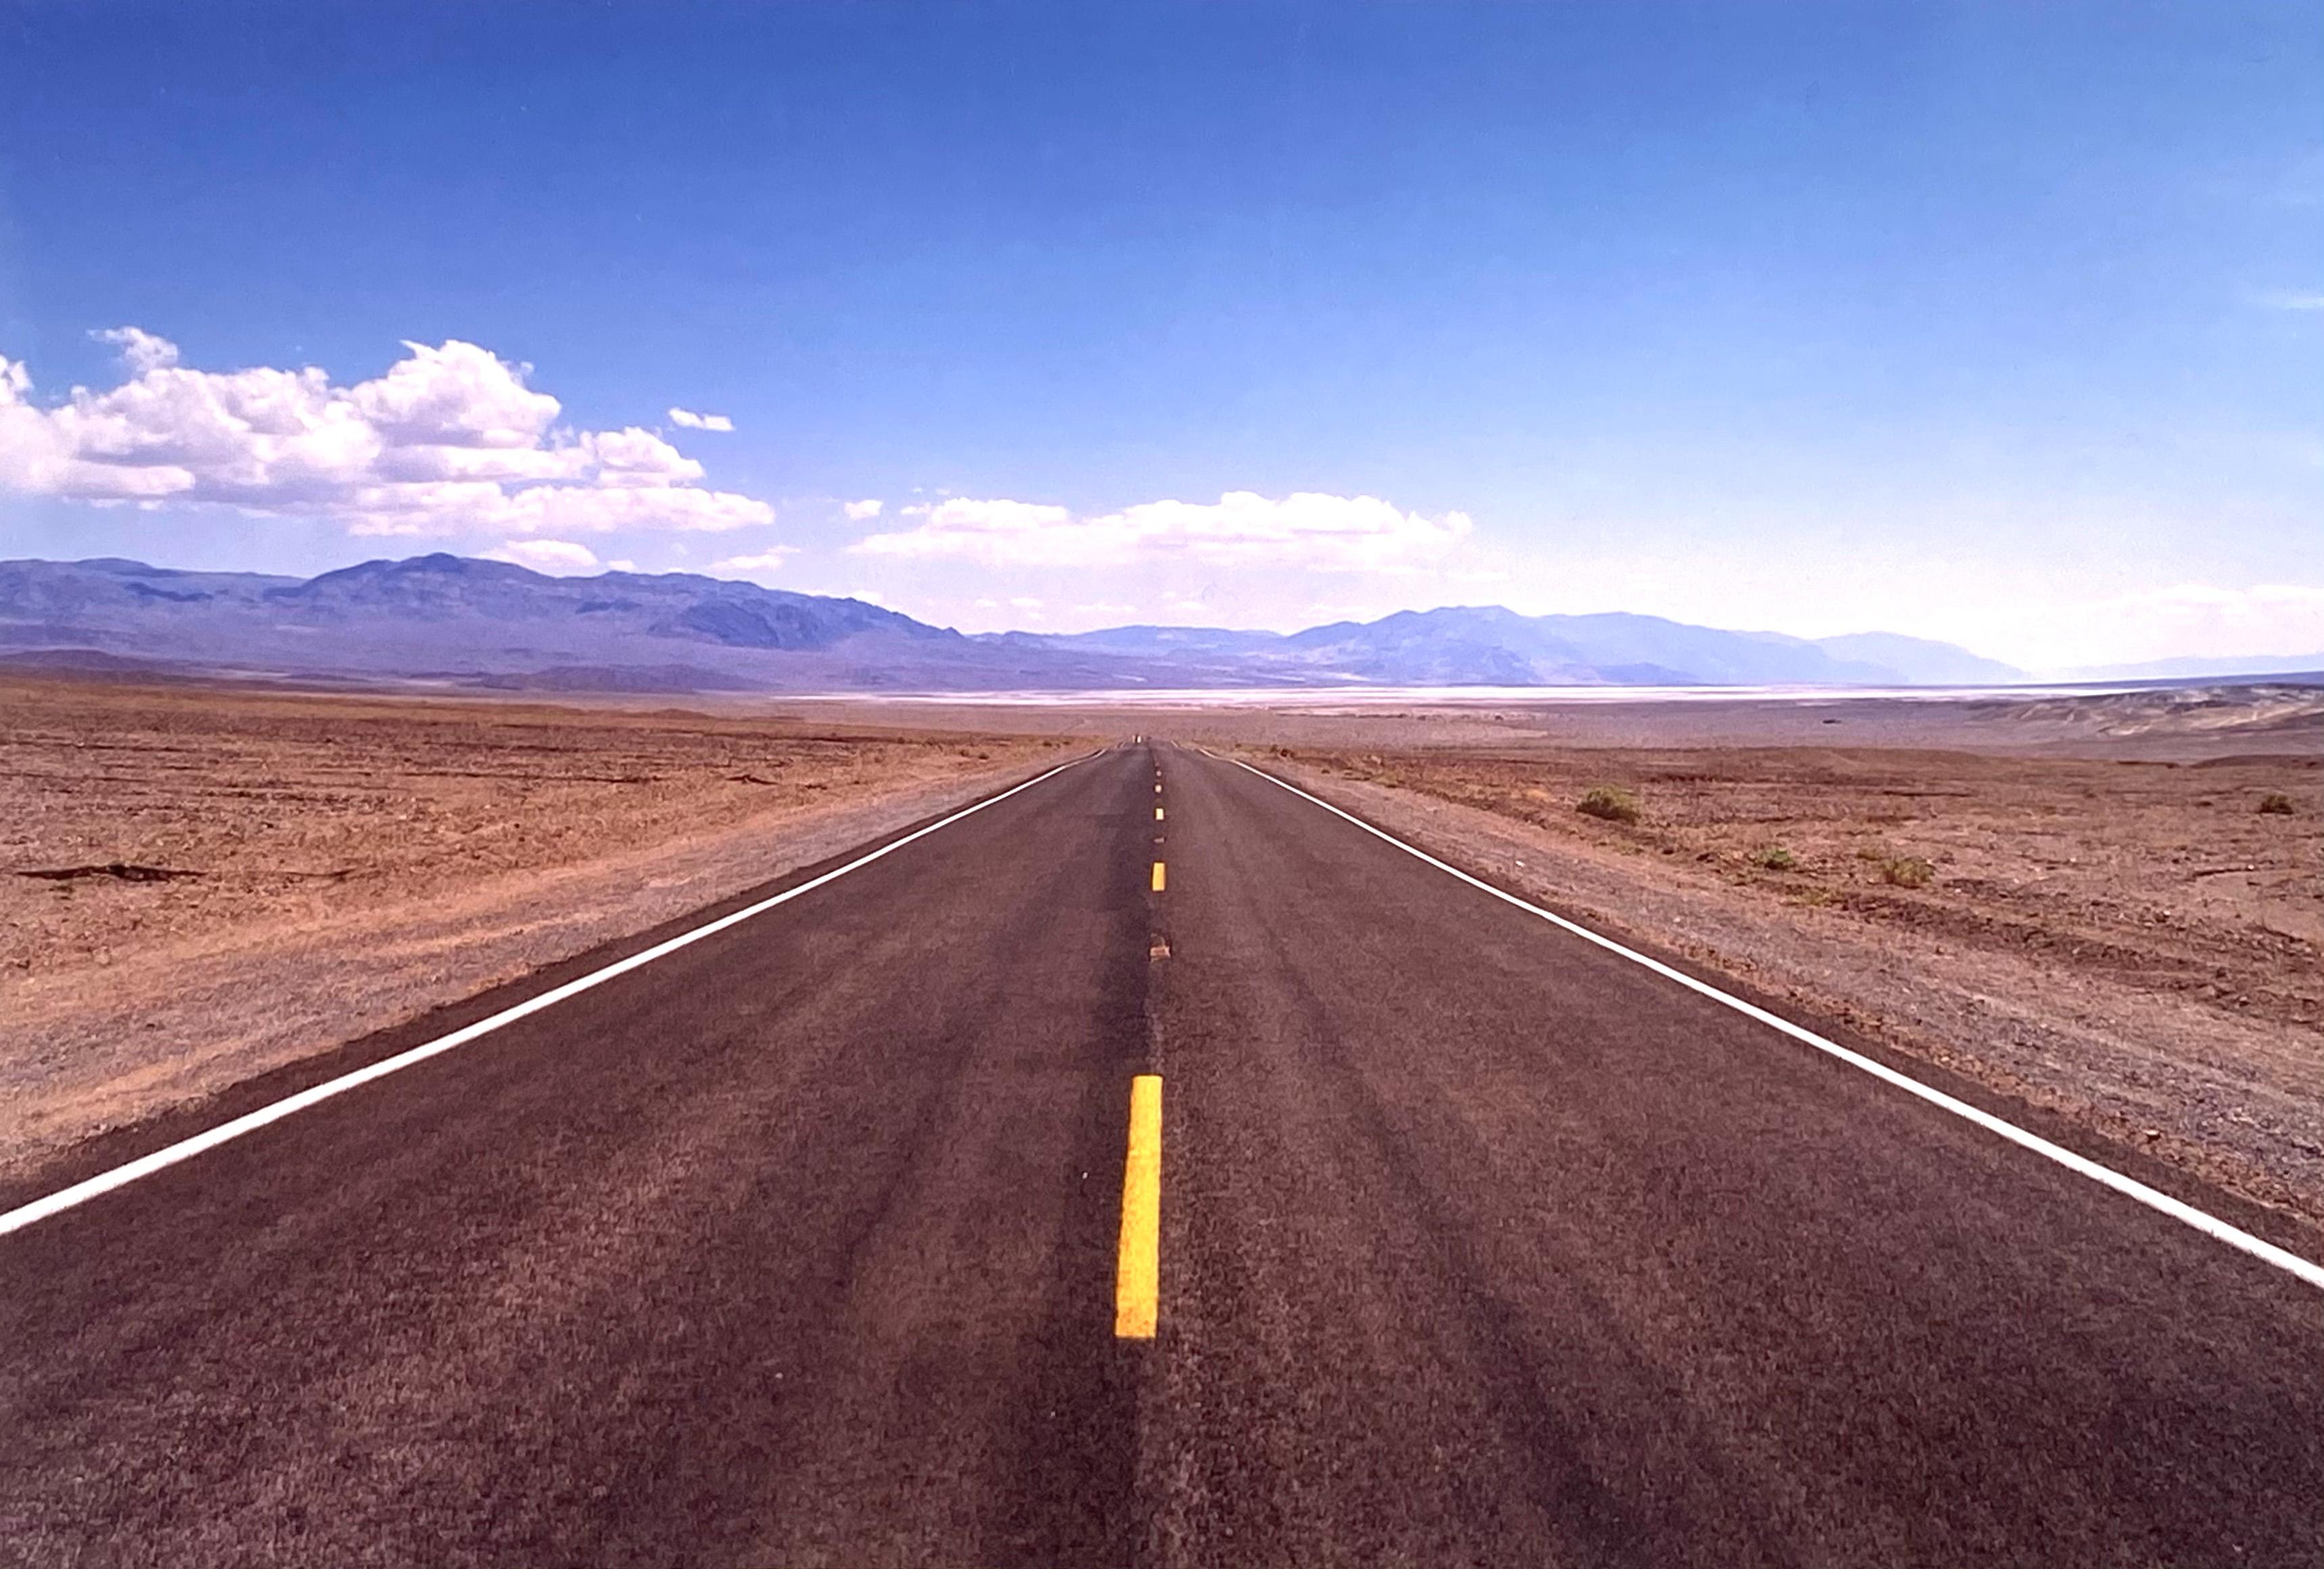 Richard Heeps Color Photograph - The Road to Death Valley, Mojave Desert, California - Landscape Color Photo